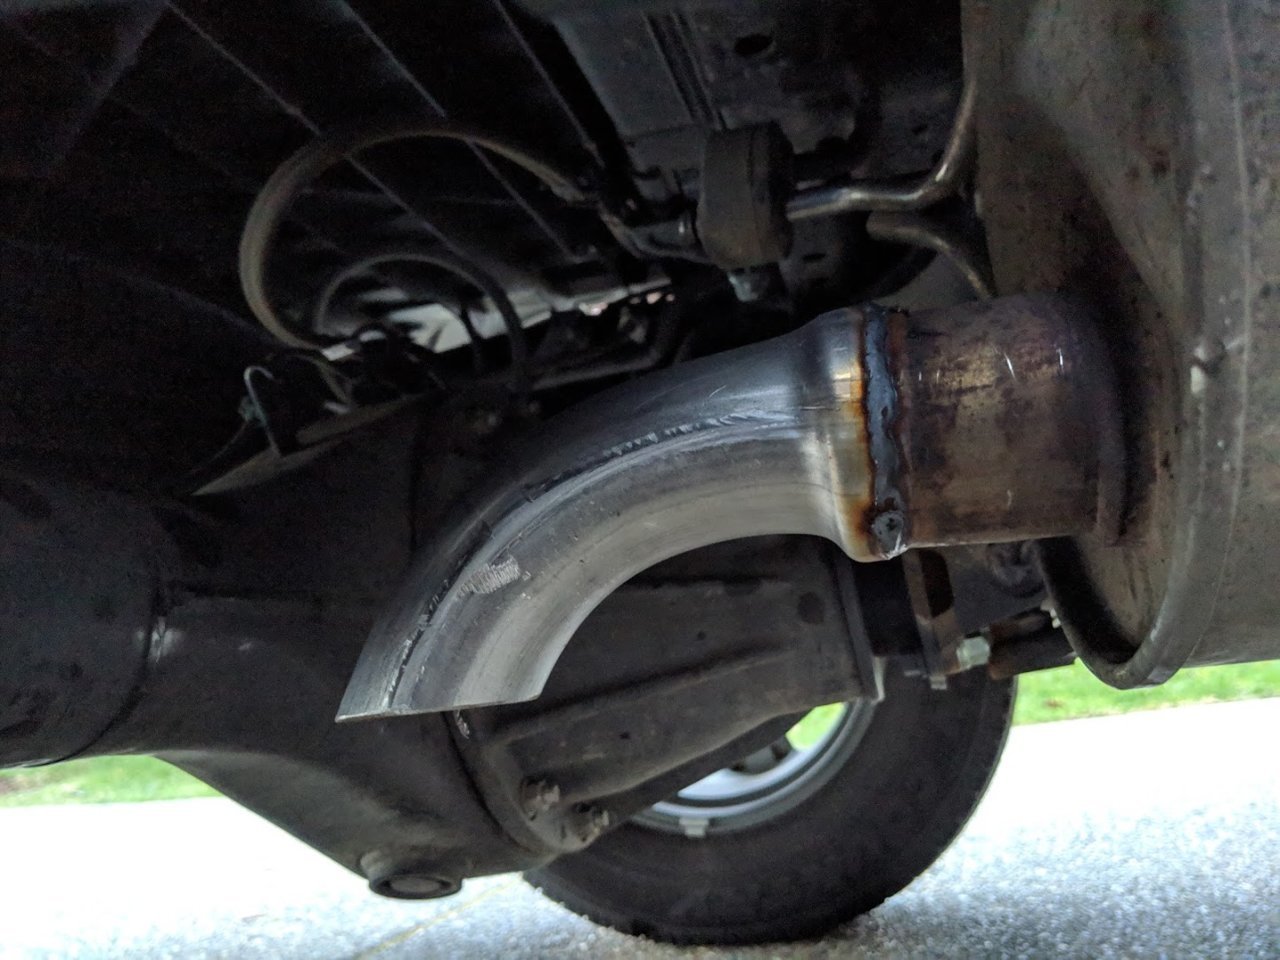 How to Fit Larger Spare Tire and Axle Dump Exhaust | Page 2 | Tacoma World